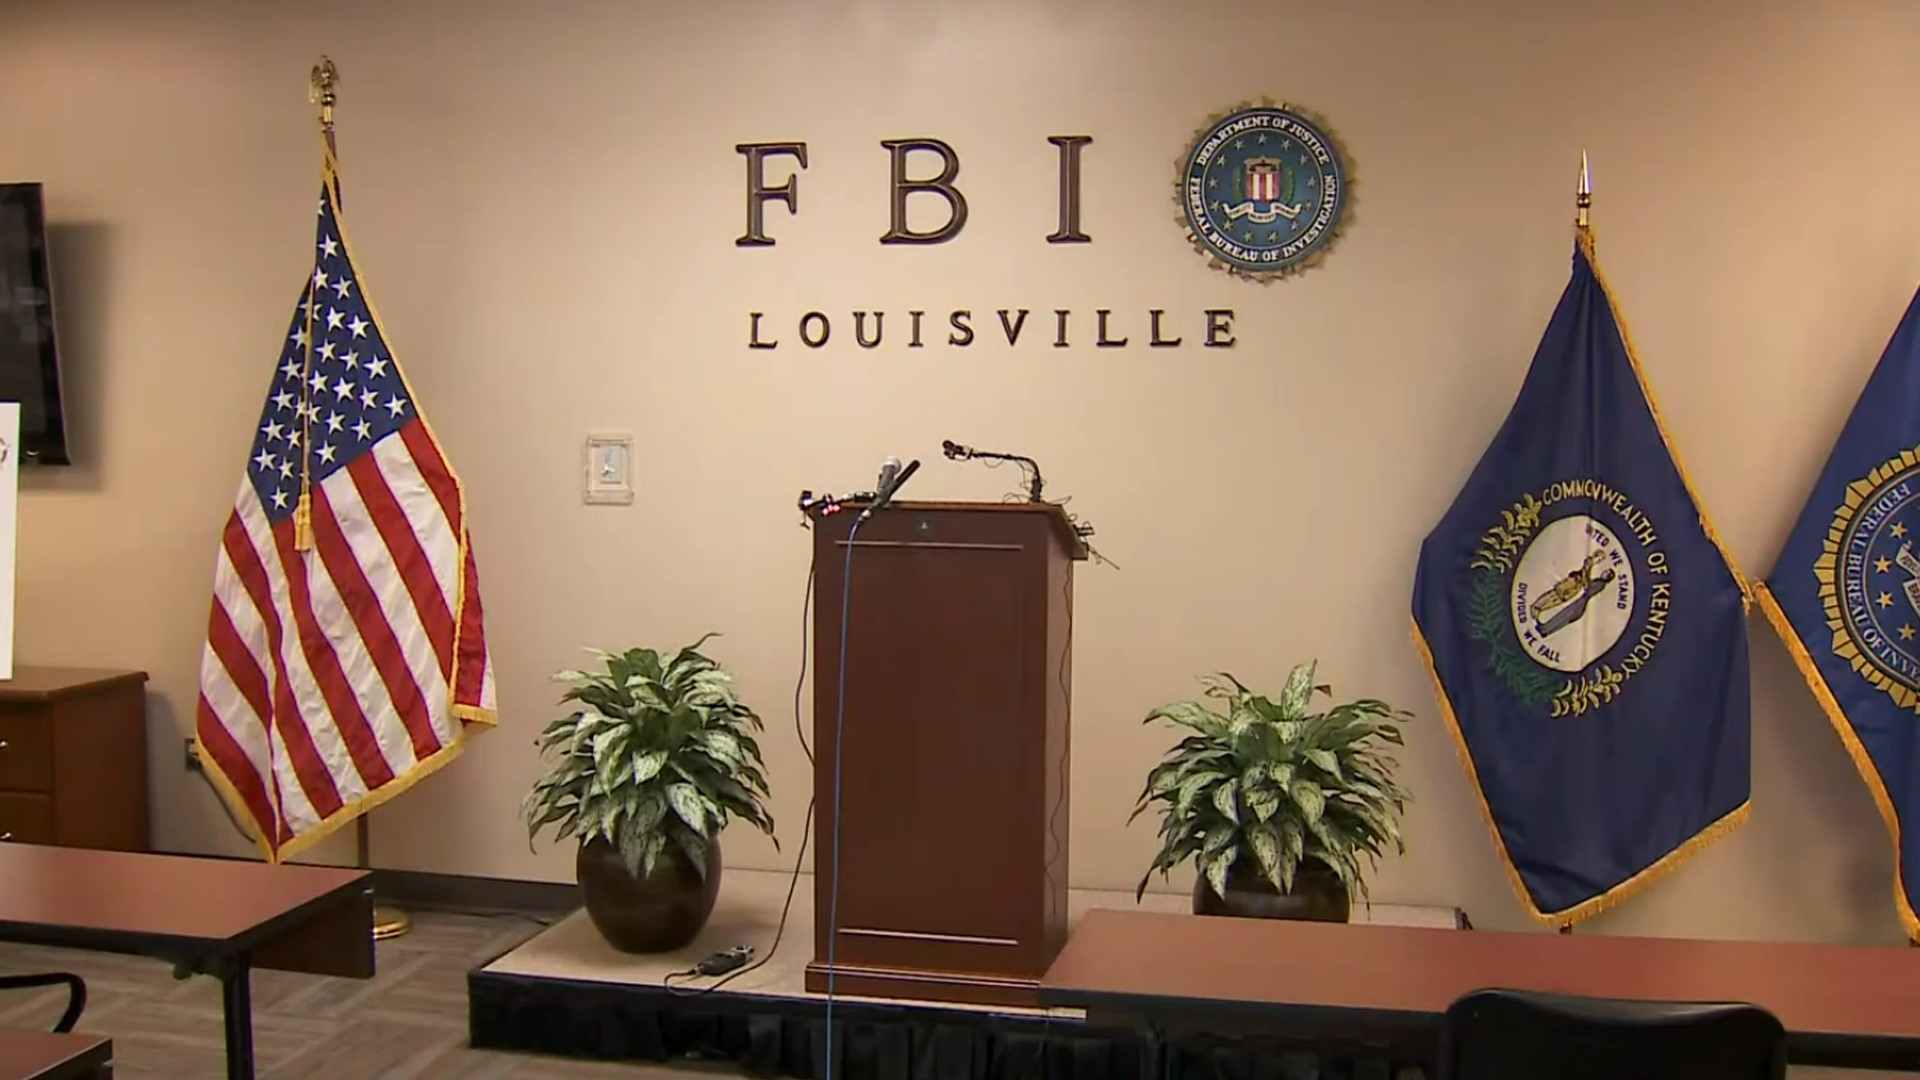 Members of a Louisville drug trafficking organization were federally indicted by a grand jury. A total of 10 members face charges.